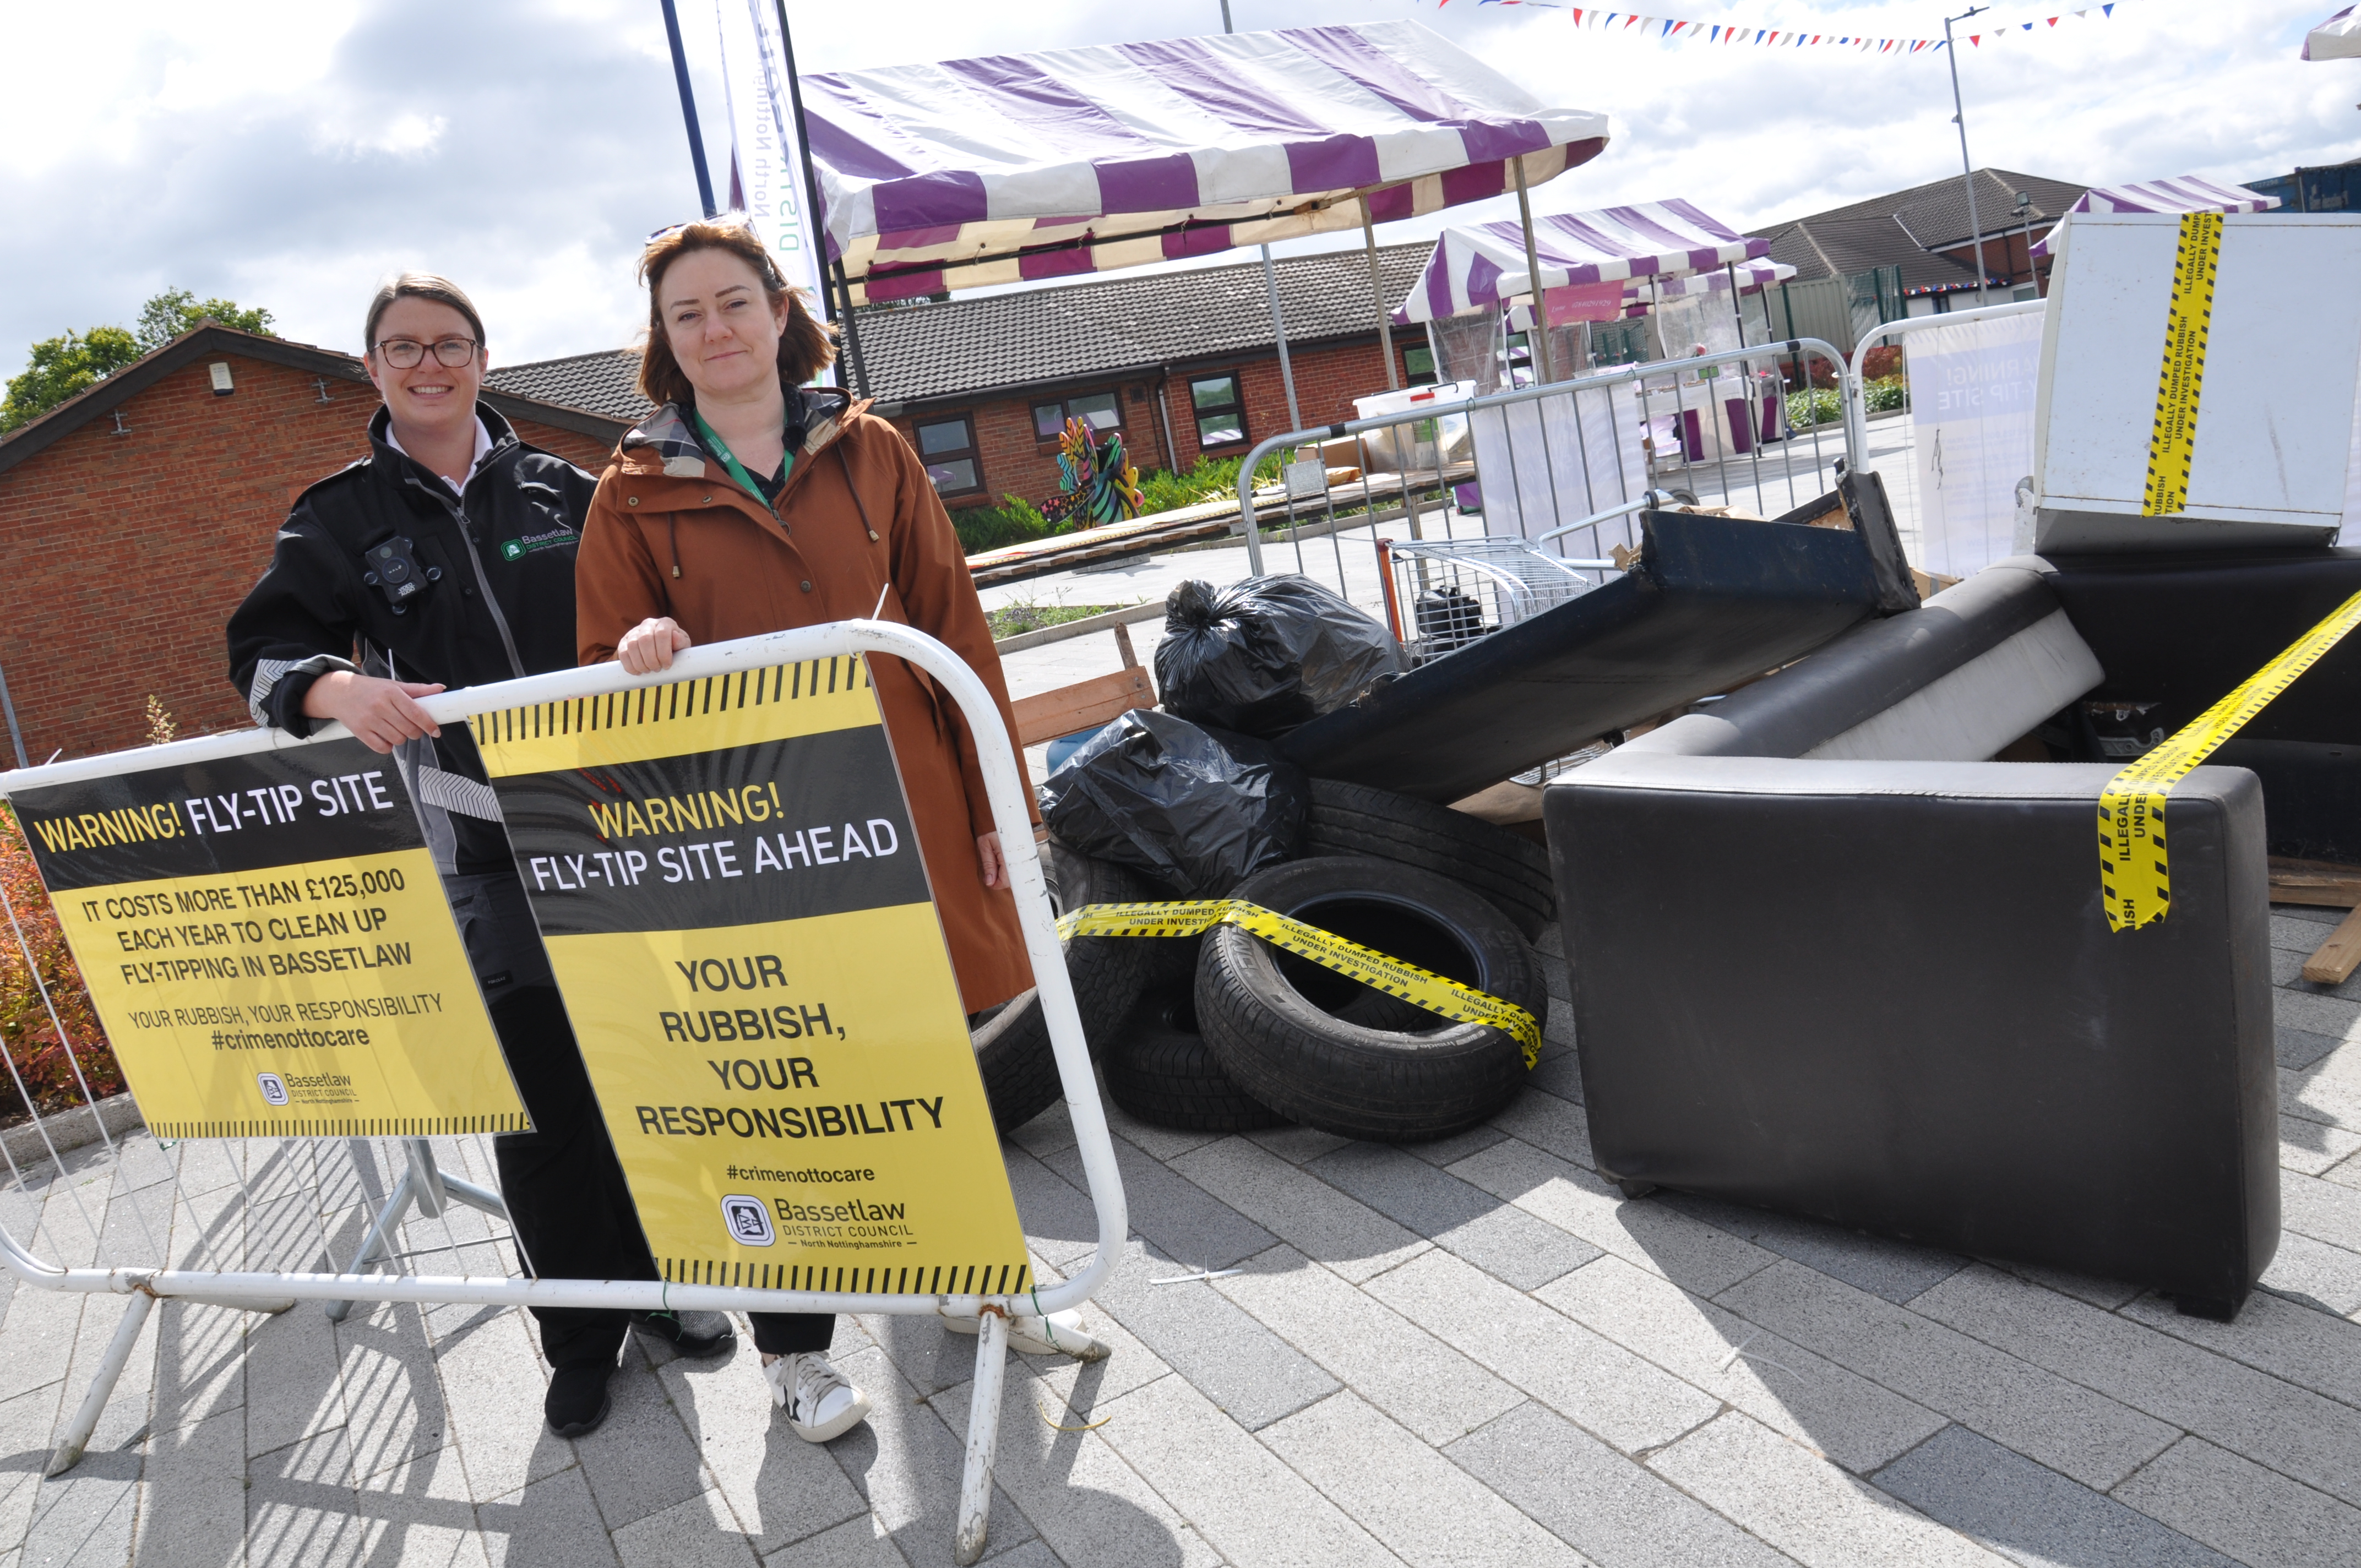 Fly-tipping hits high street